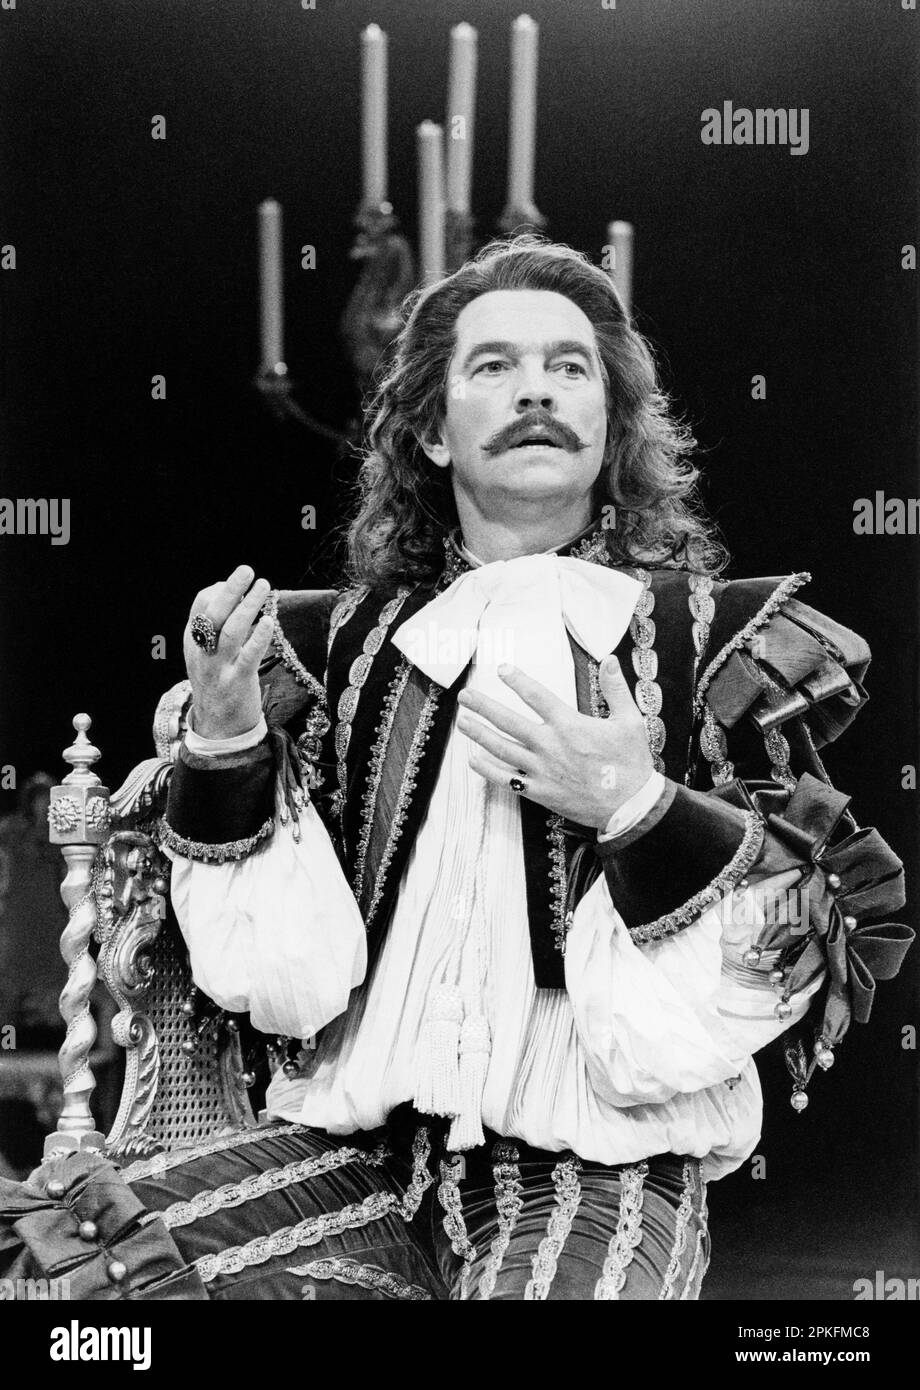 Tom Courtenay (Alceste) in THE MISANTHROPE by Moliere at the Royal Exchange Theatre, Manchester, England  21/05/1981  translated by Richard Wilbur  design: Malcolm Pride  lighting: Joe Davis  director: Casper Wrede Stock Photo